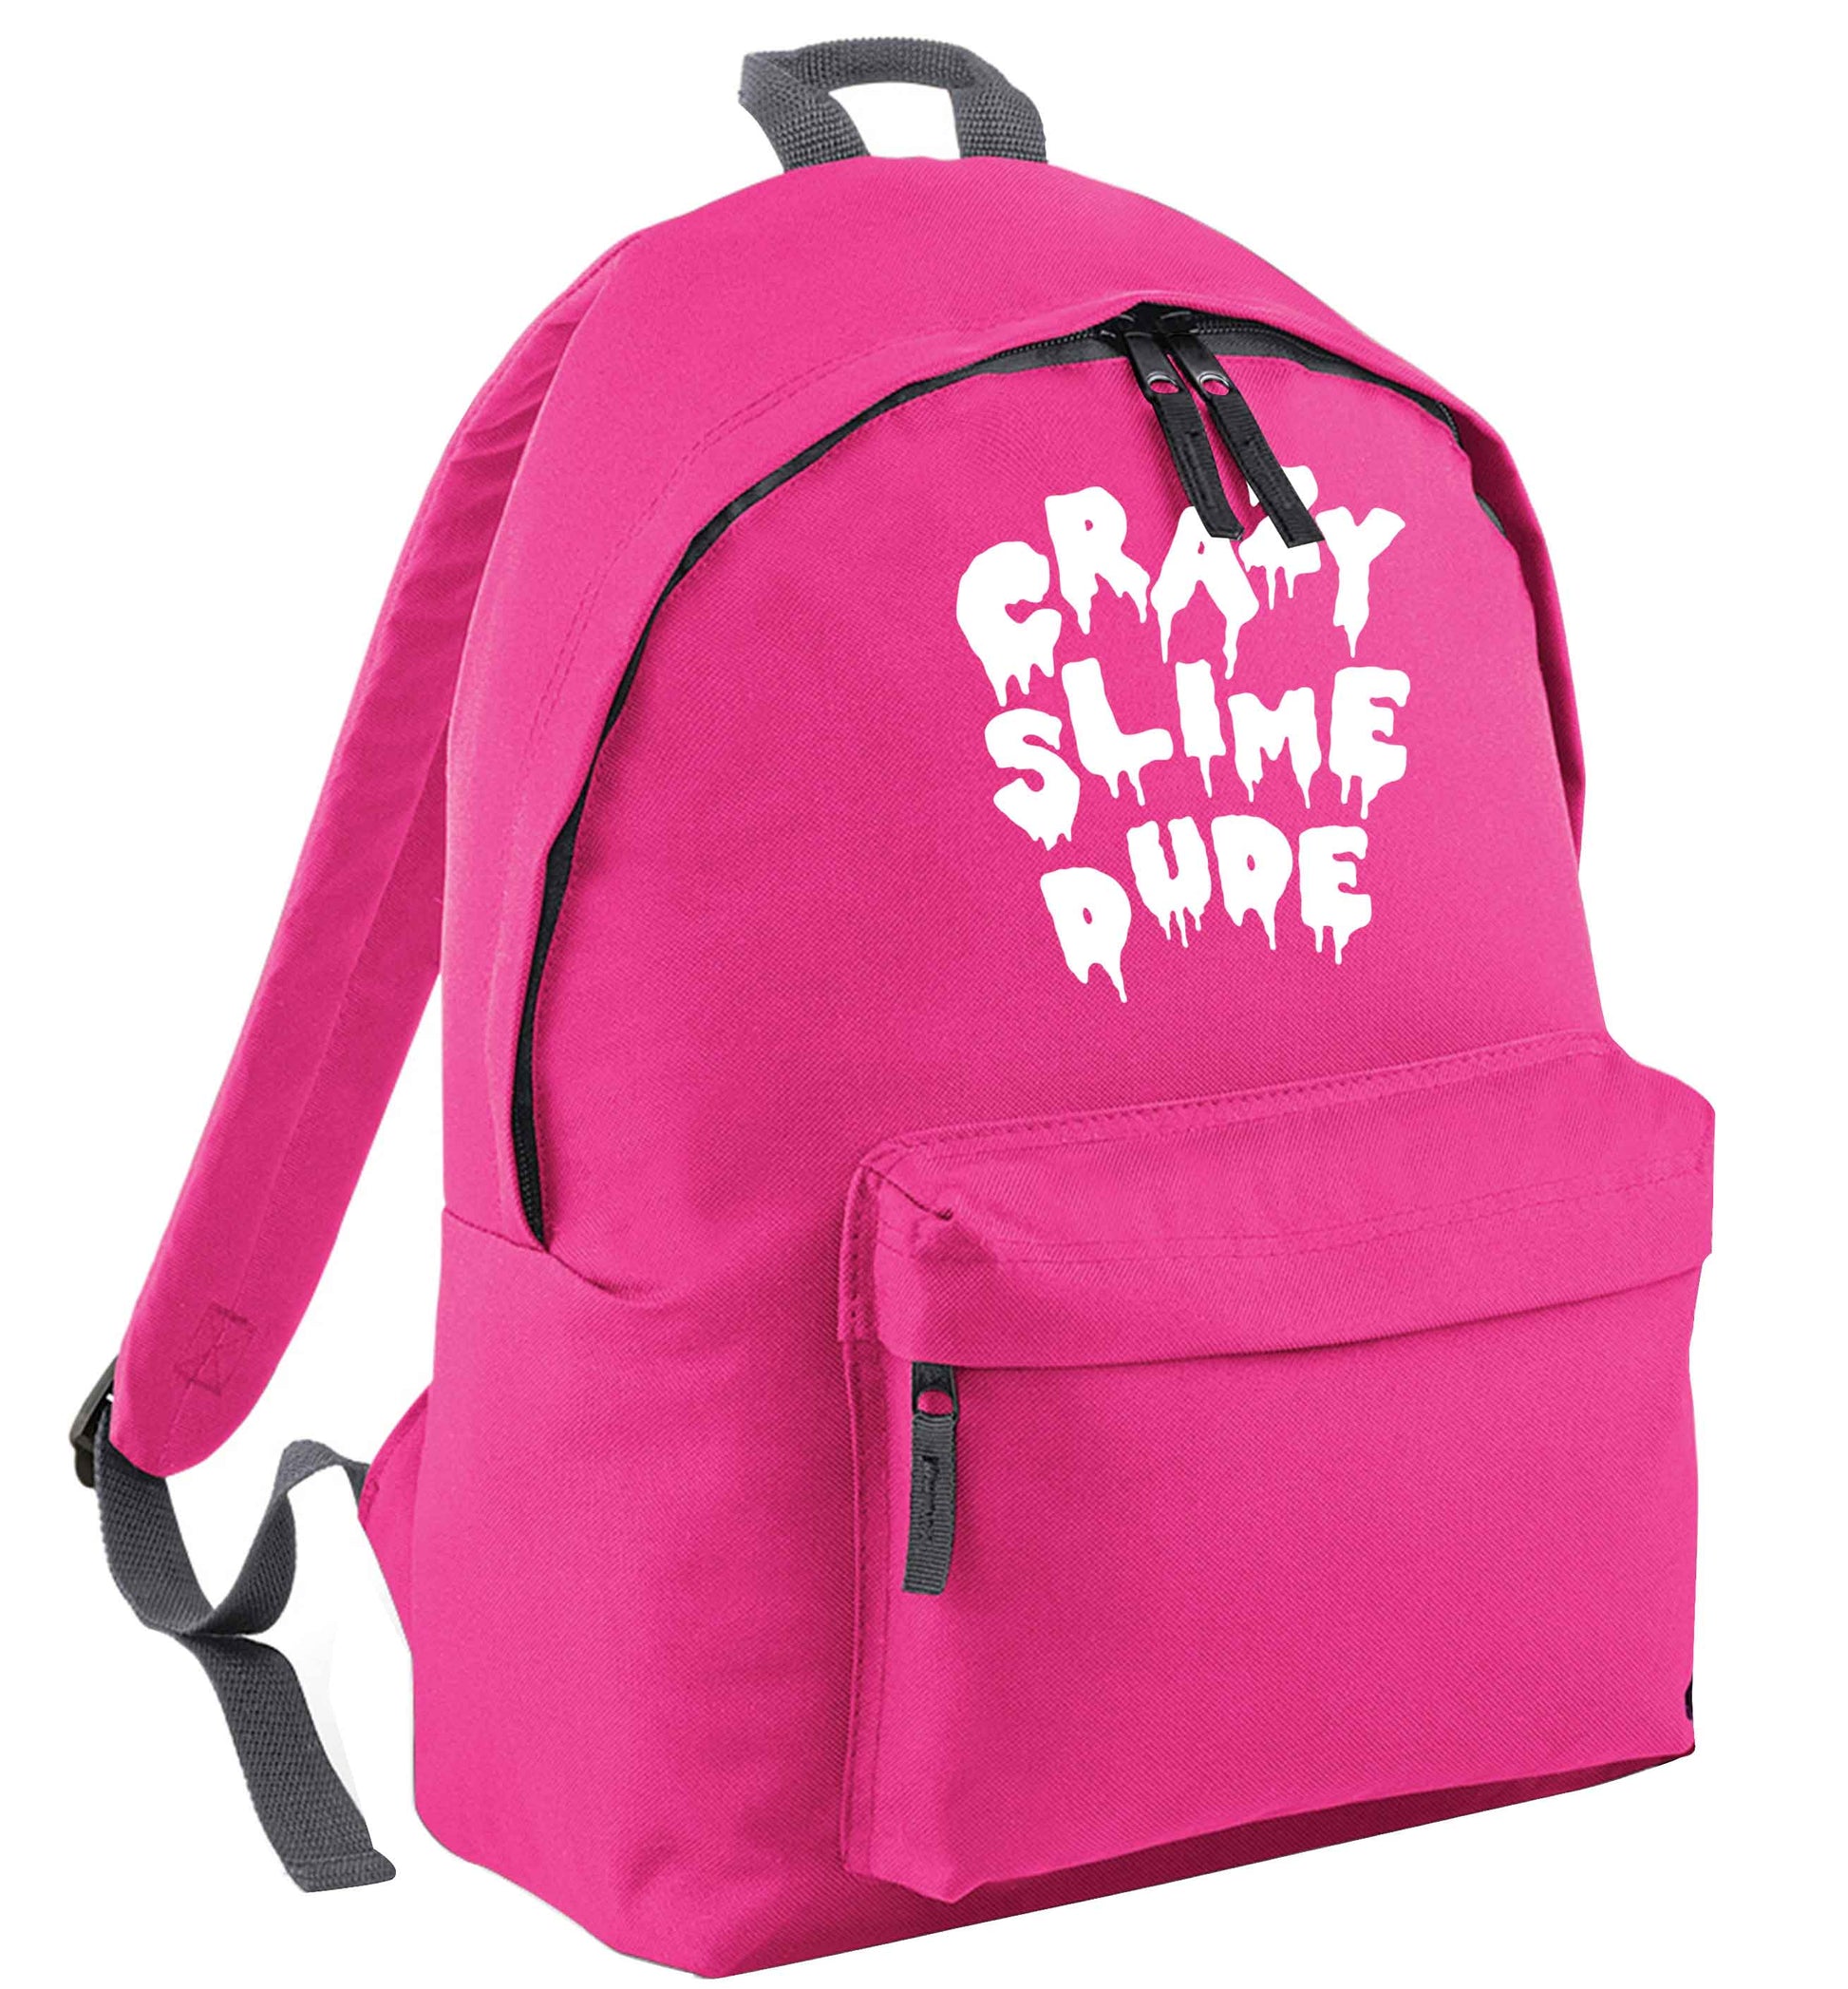 Crazy slime dude pink adults backpack